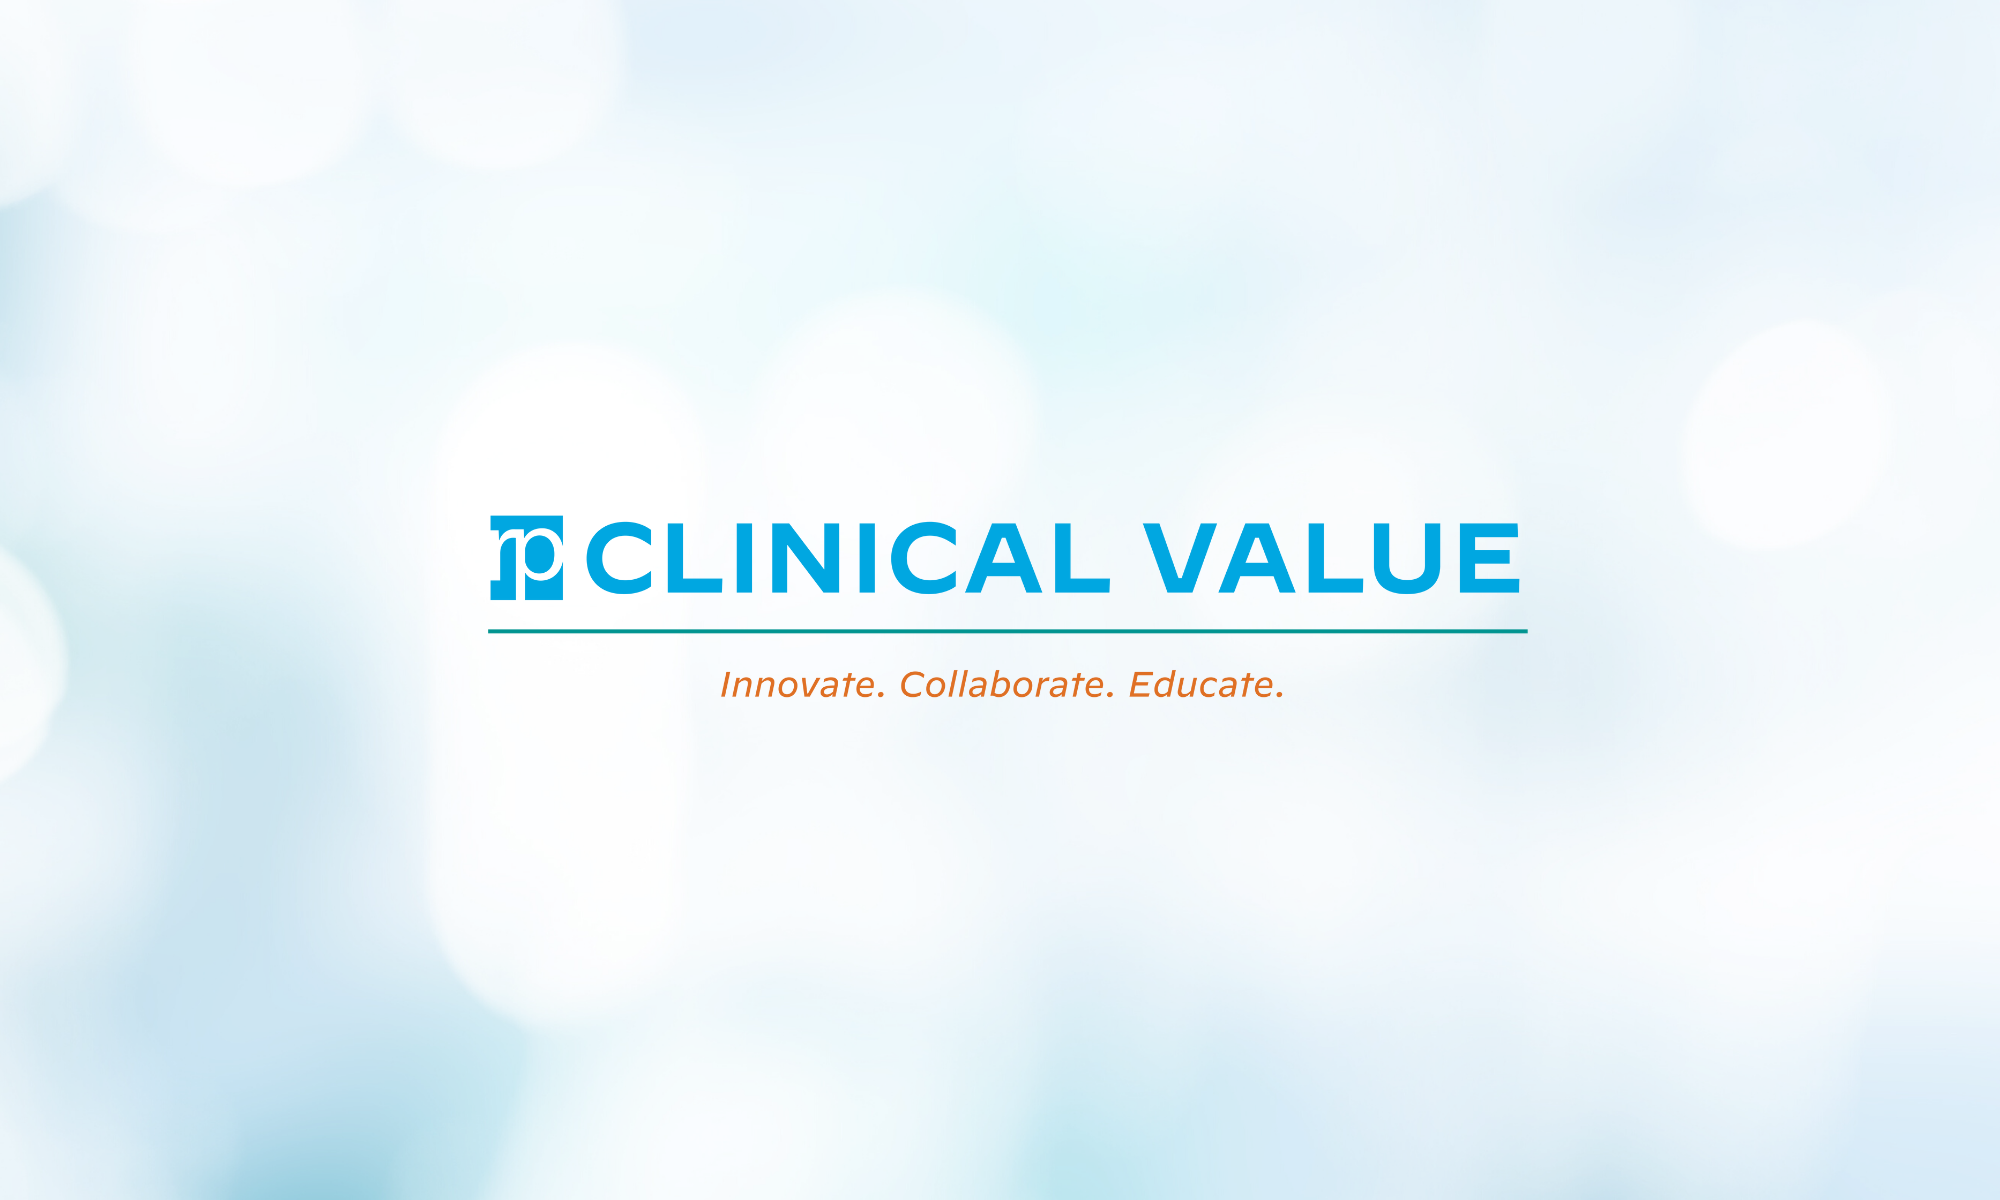 Innovate, Collaborate, Educate: Meet RP’s Clinical Value Team